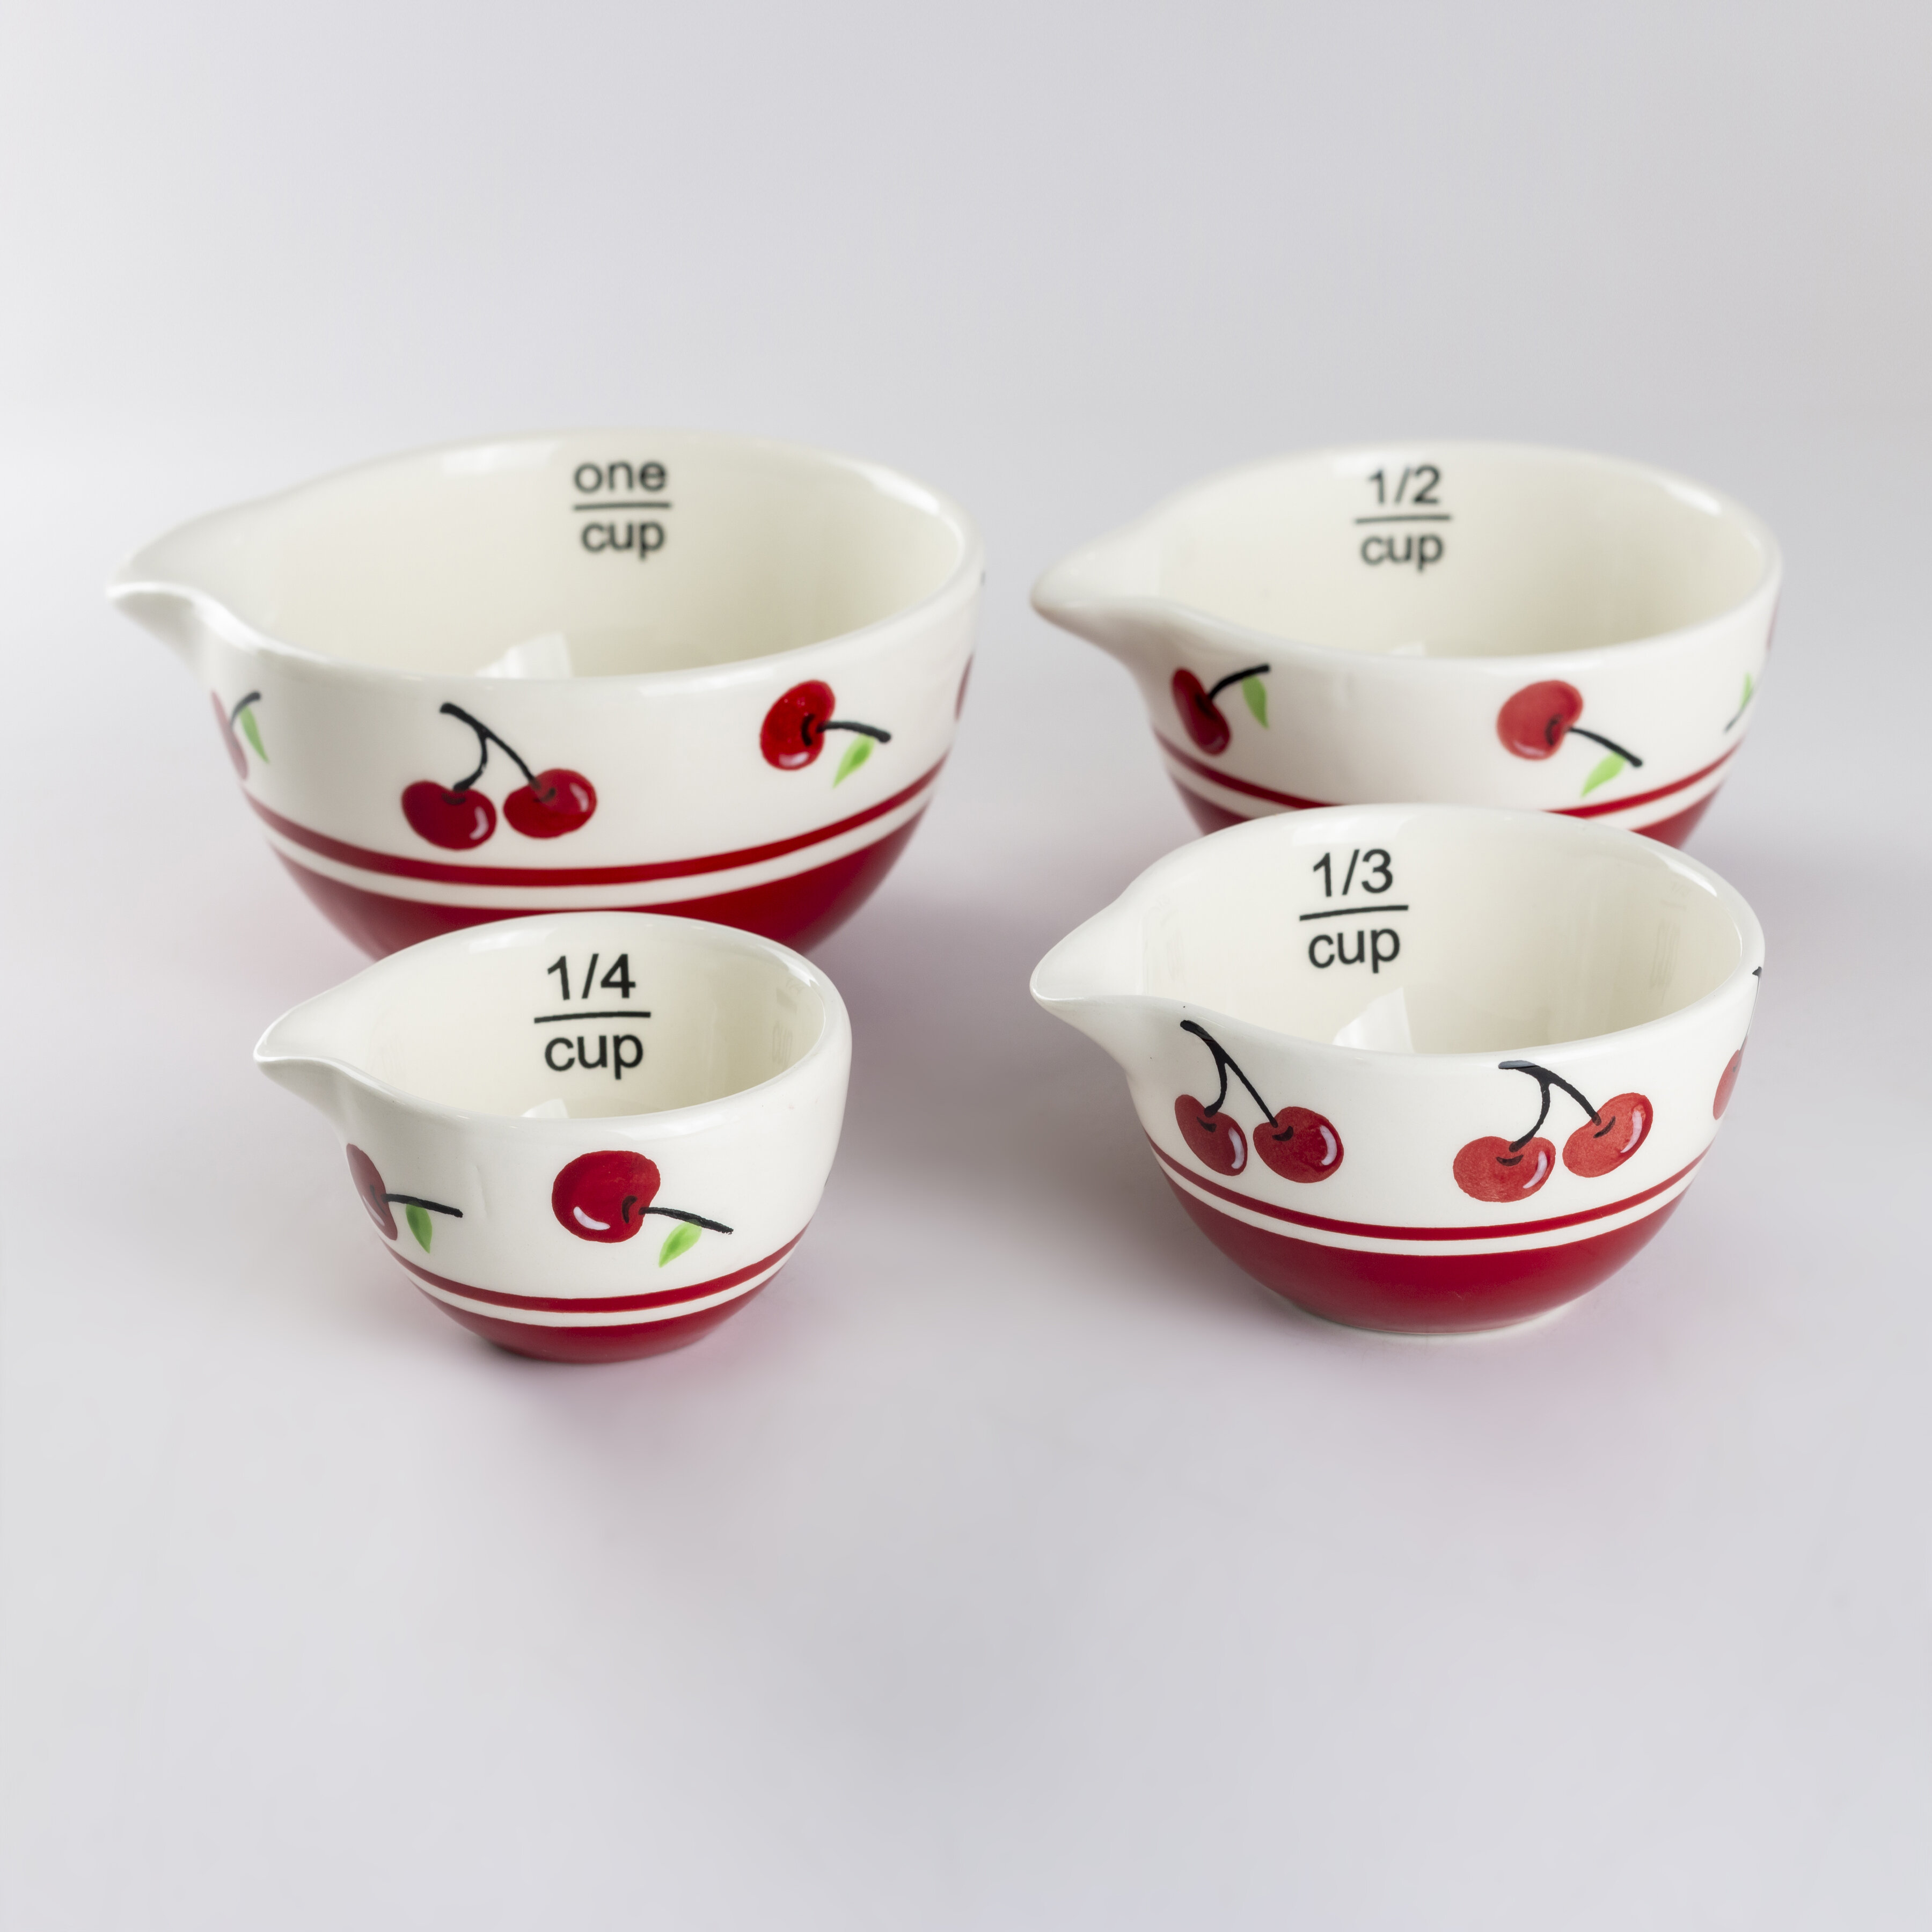 Set of 4 Ceramic Nested Measuring Cups